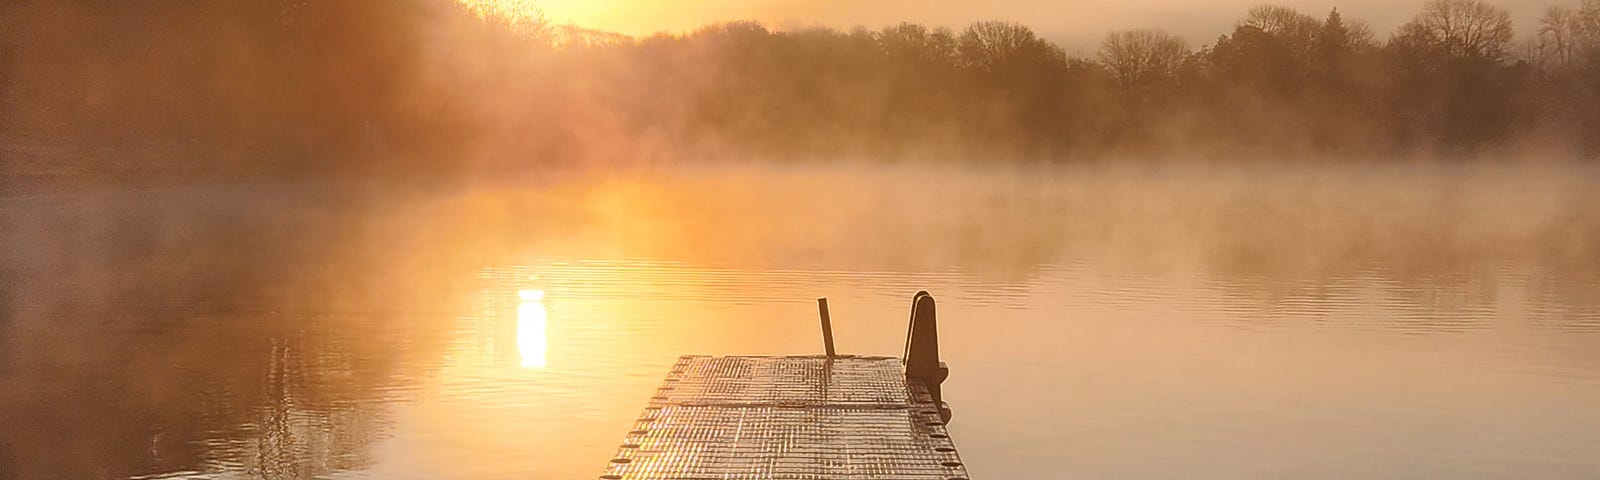 In the middle, a dock extending into the ripples and mists of the water of the lake, the sky is alit by the warm sun on the left rising over the tree line.